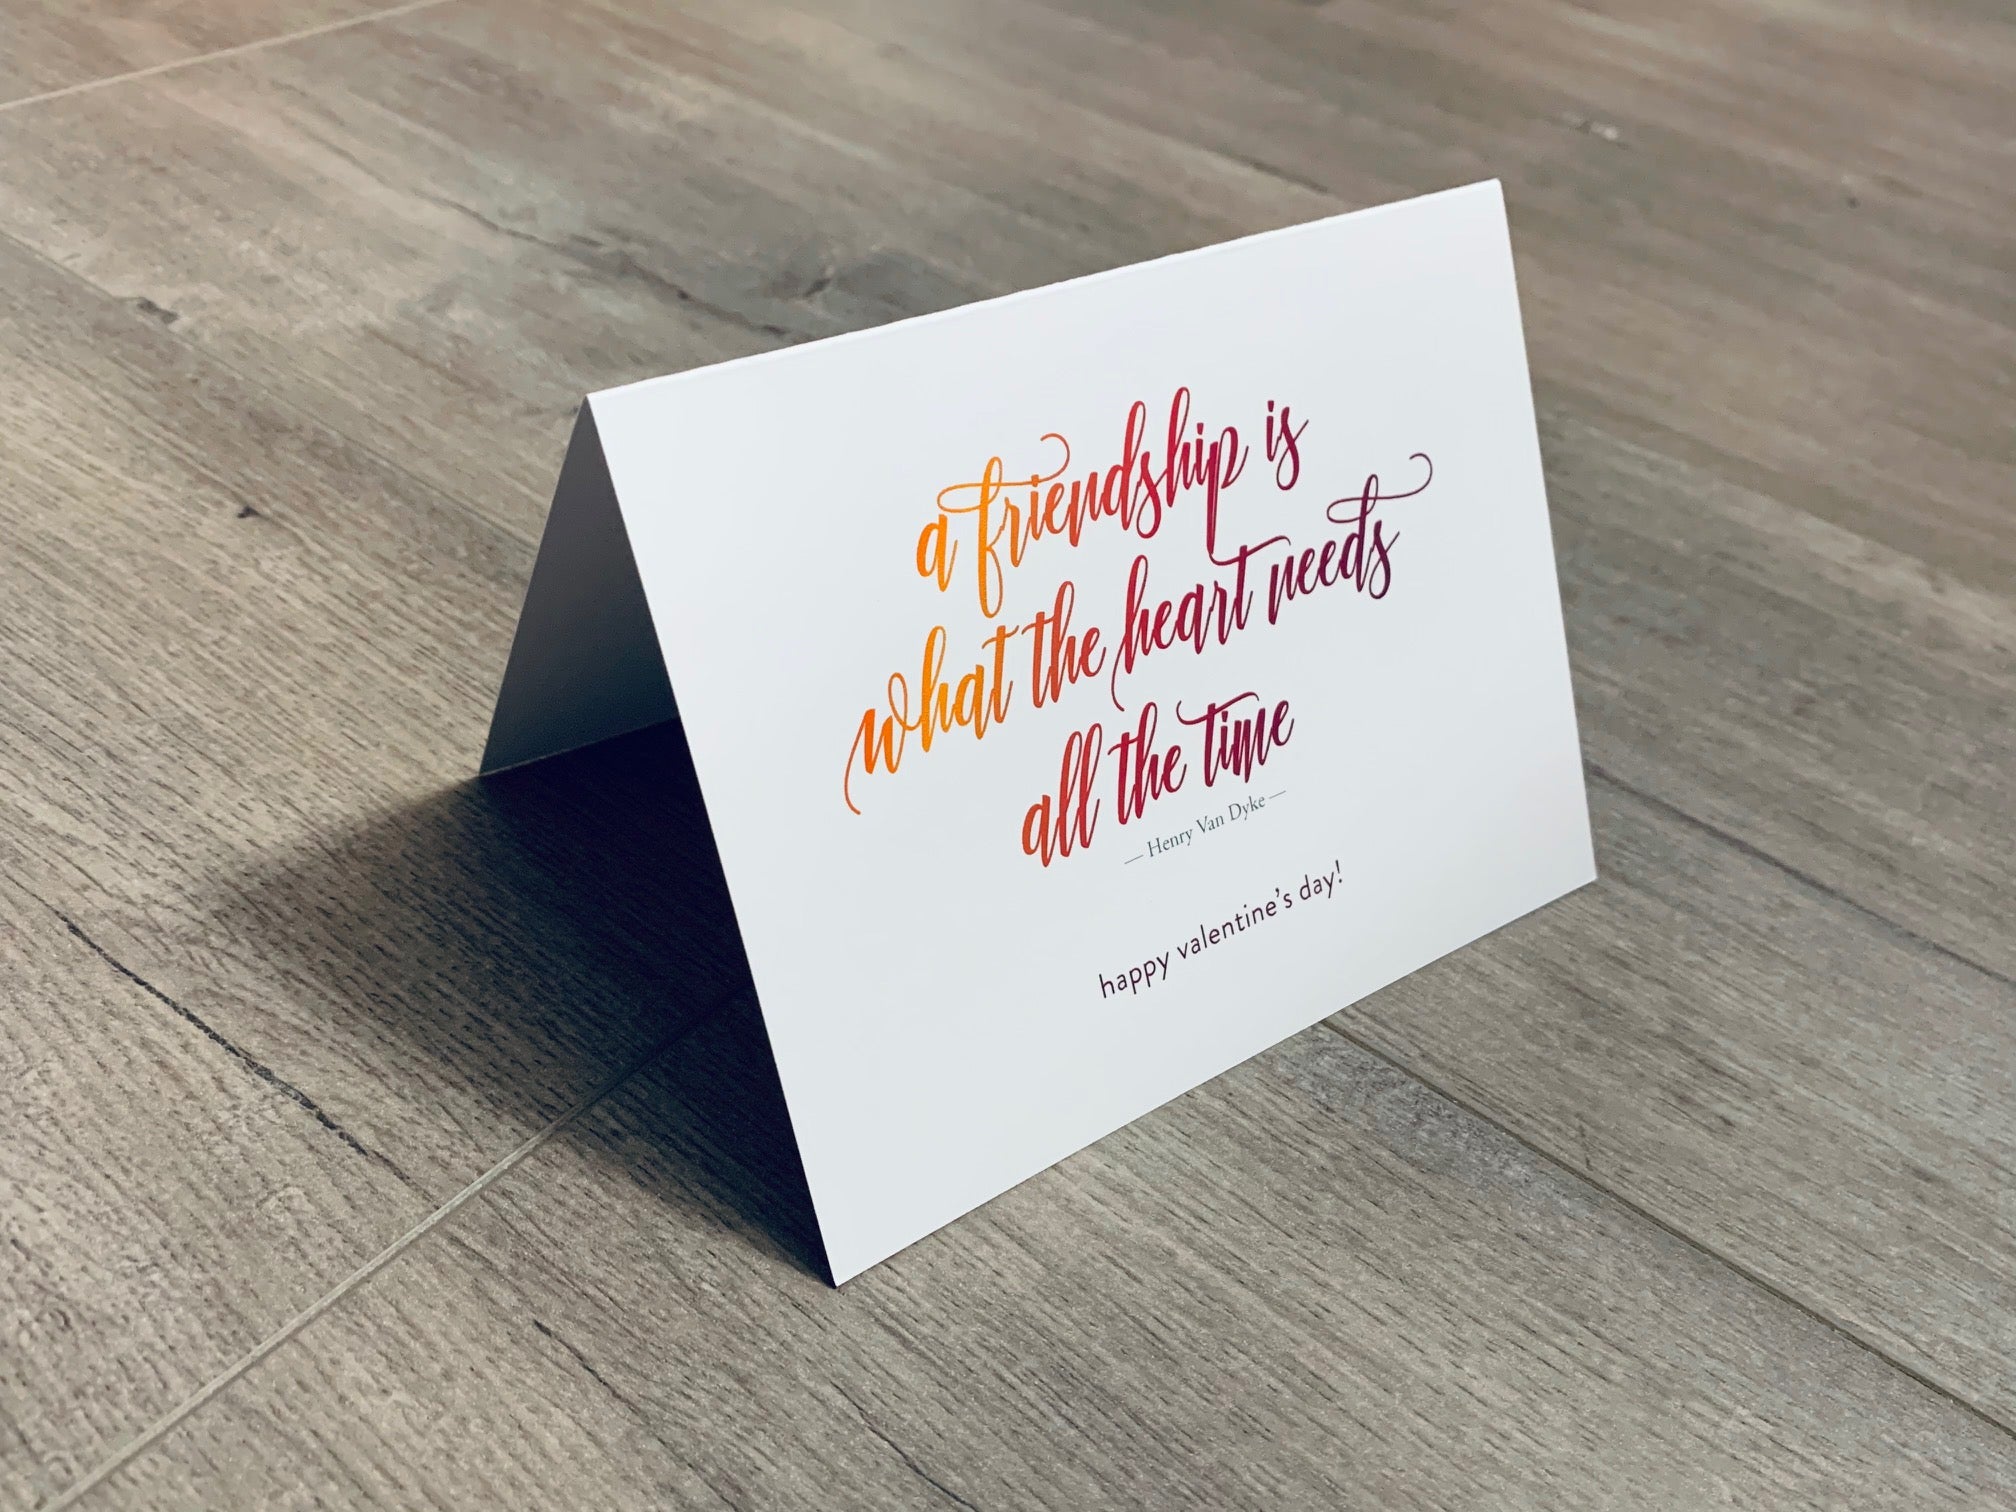 A white, folded notecard sits on a wooden floor. The card has a quote by Henry Van Dyke and says, "a friendship is what the heart needs all the time." The Friendship Valentines collection by Stationare.